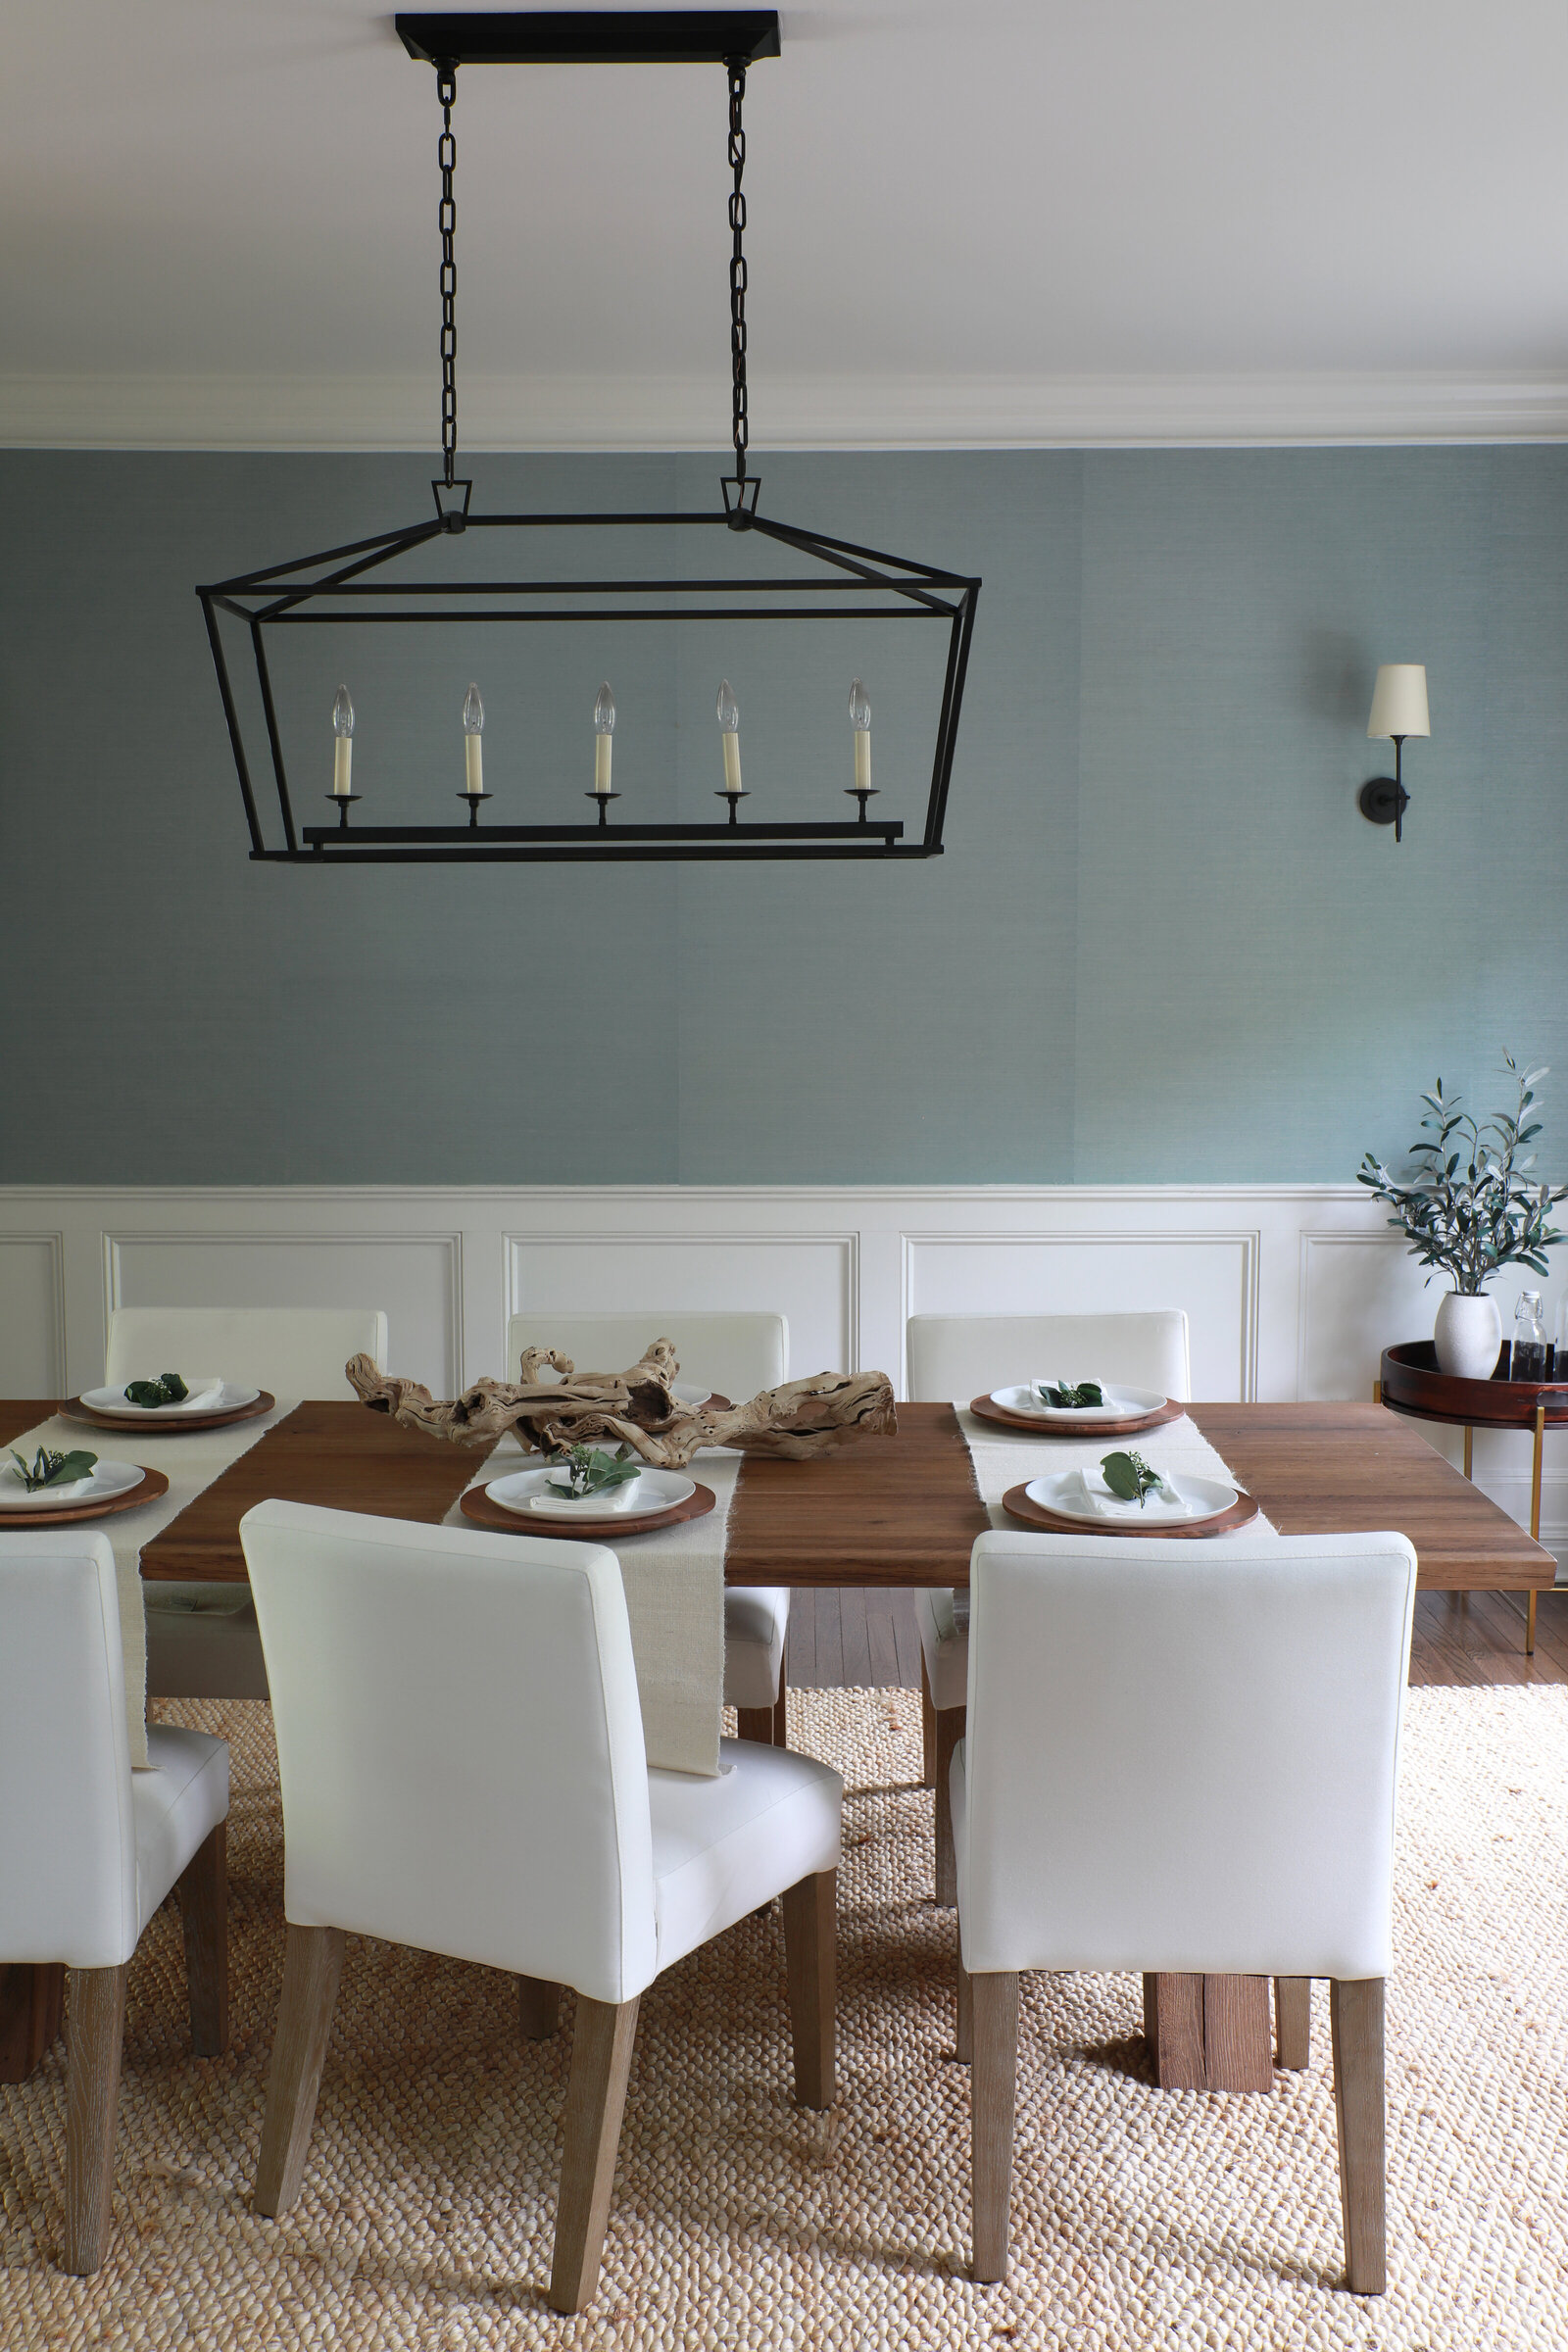 MODERN-COASTAL-DINING-ROOM-WITH-TABLE-SETTING